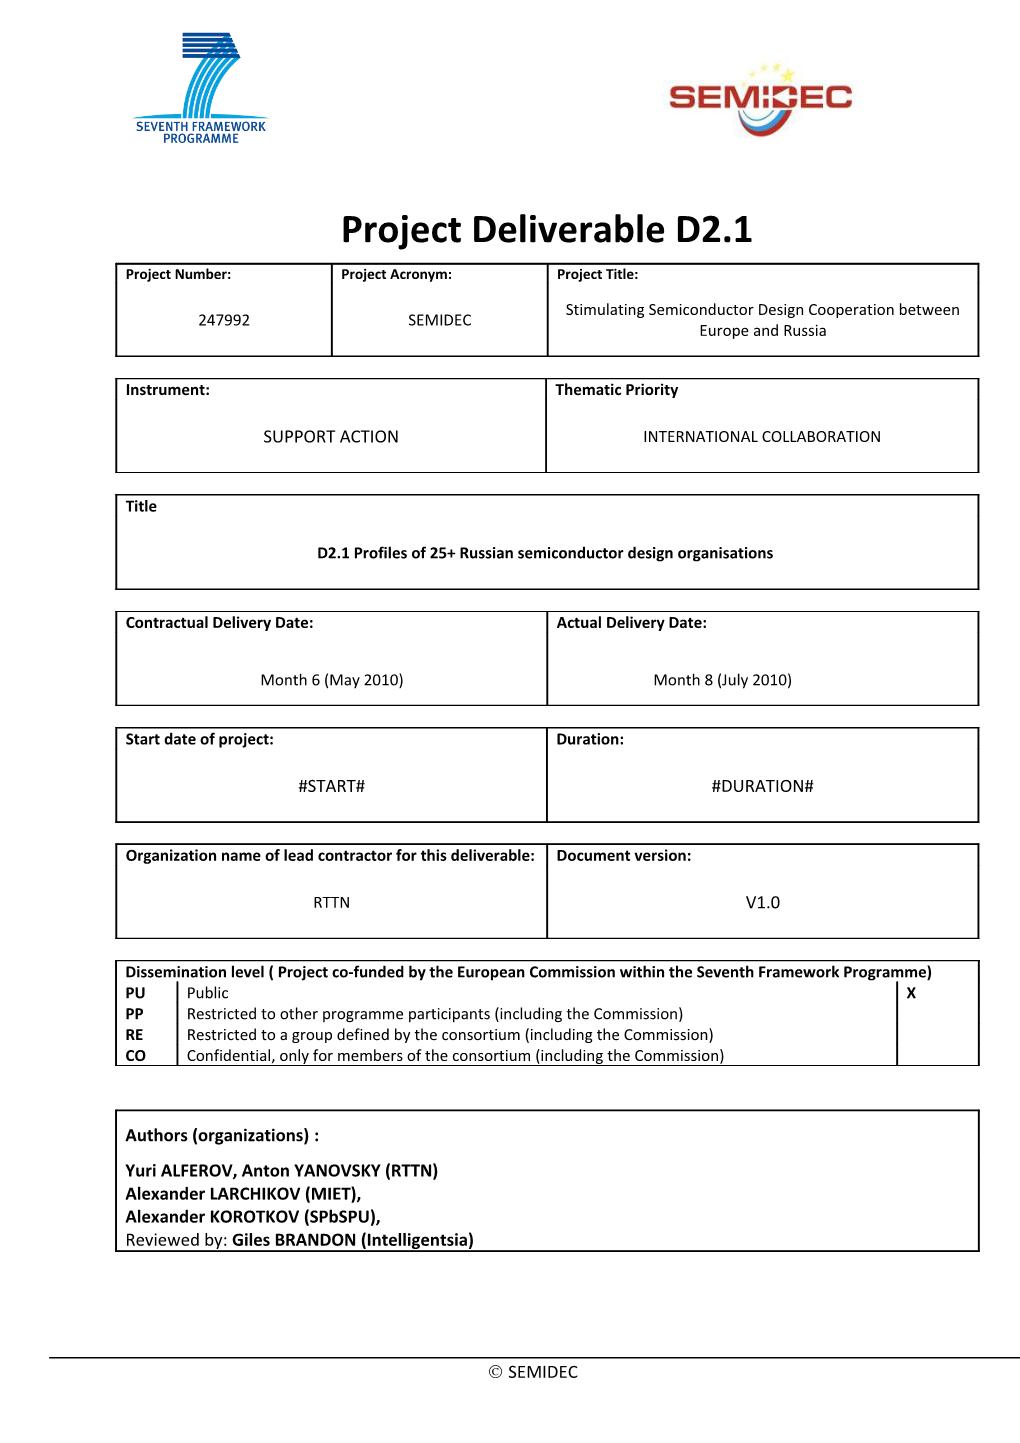 Deliverable D2.1 Profiles of 25+ Russian Semiconductor Design Organisations